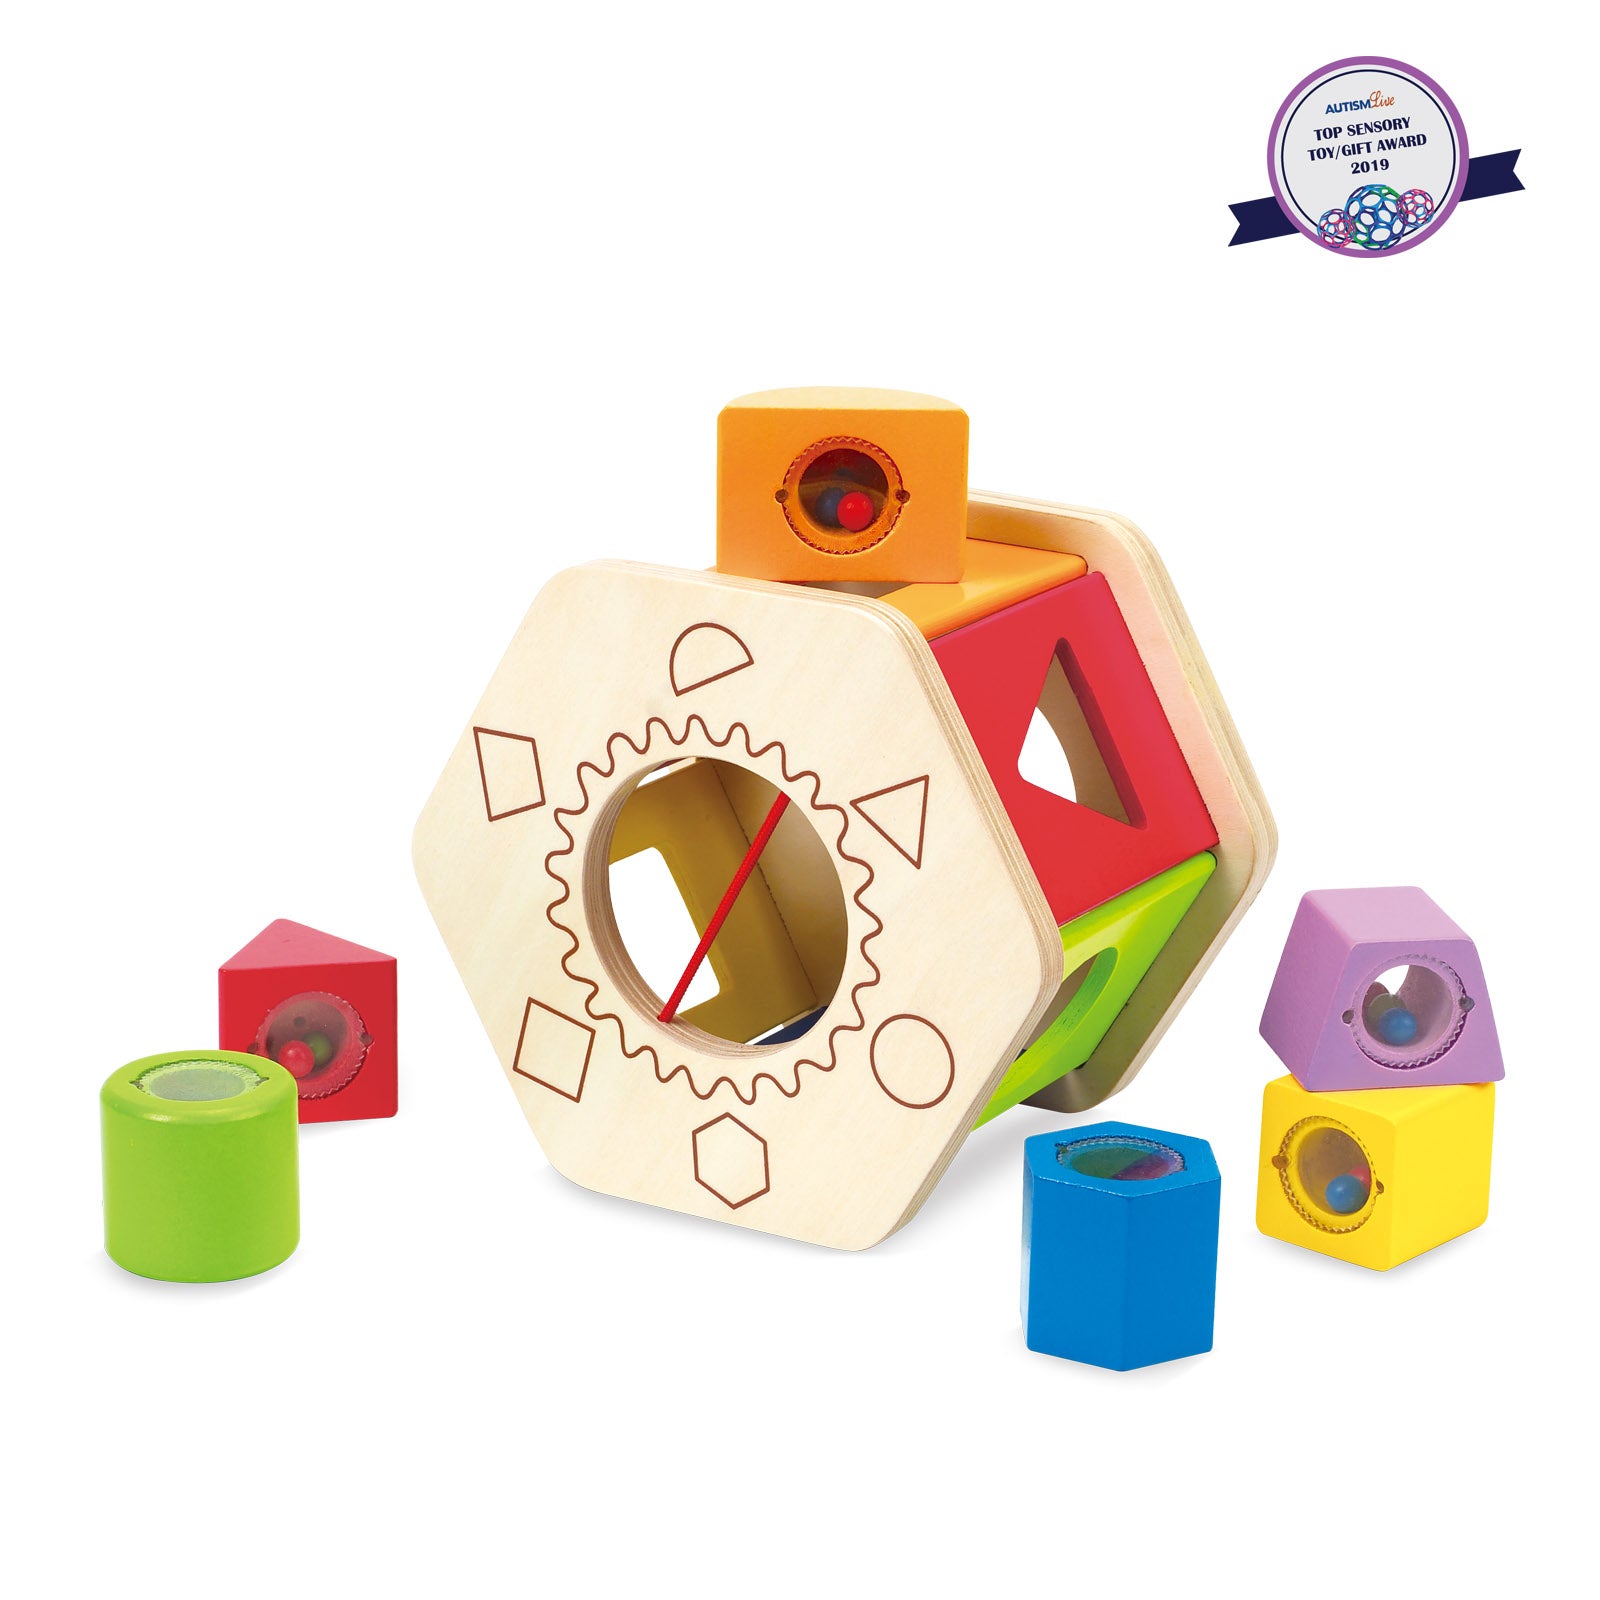 Shake and Match Shape Sorter - Ages 12mth+